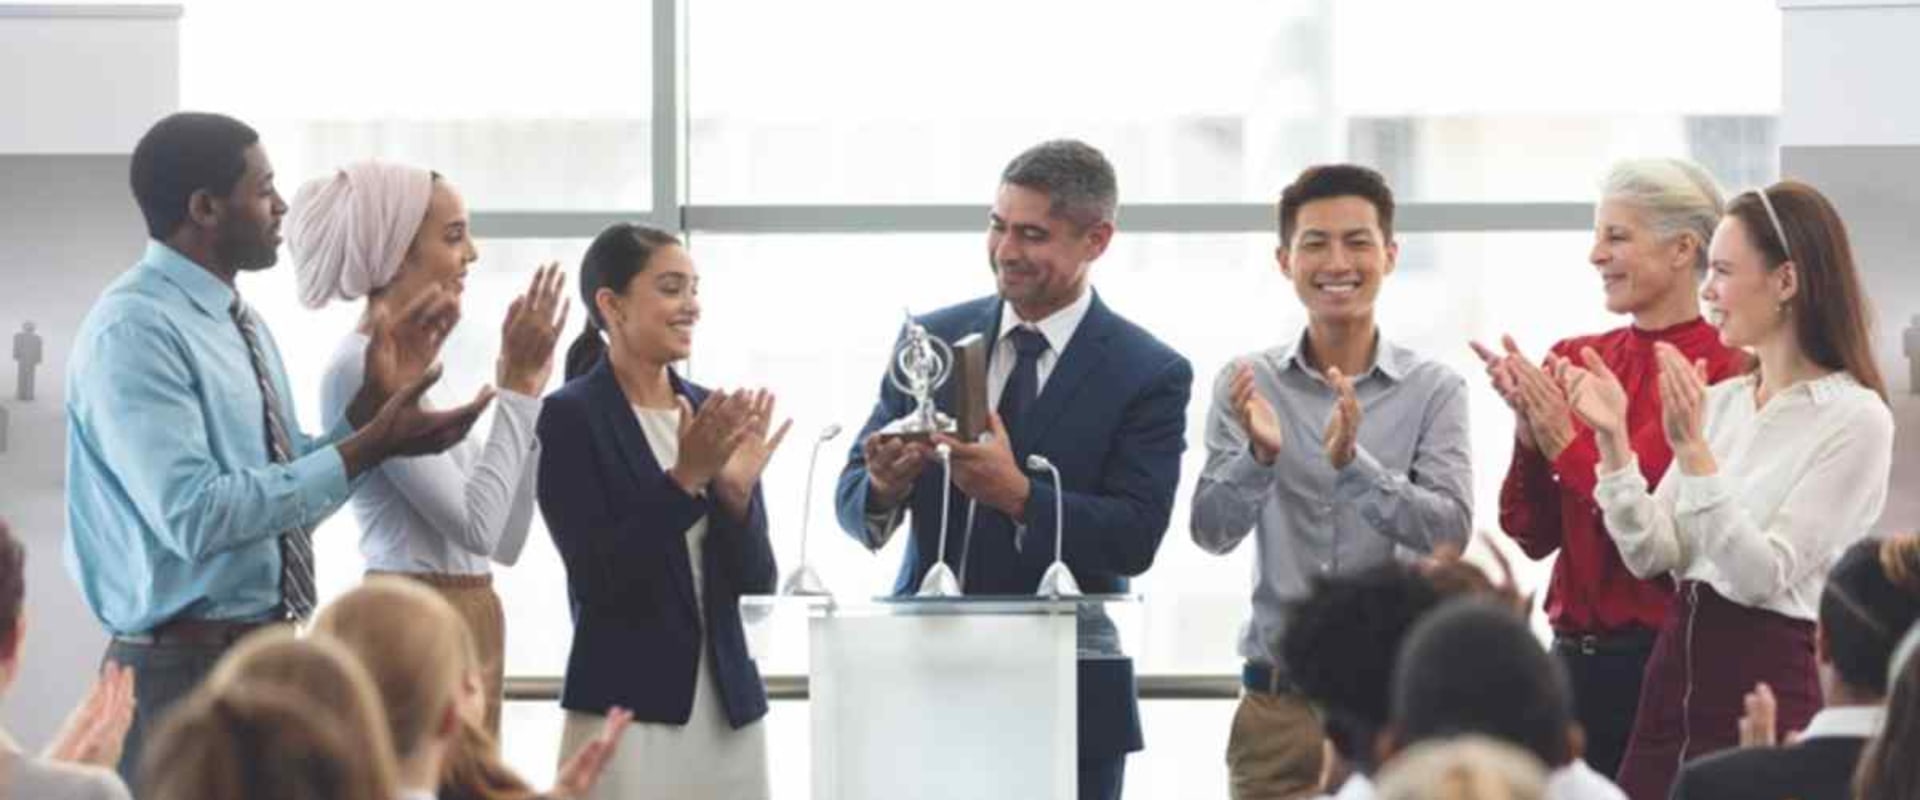 Developing Incentive Programs to Reward Employees